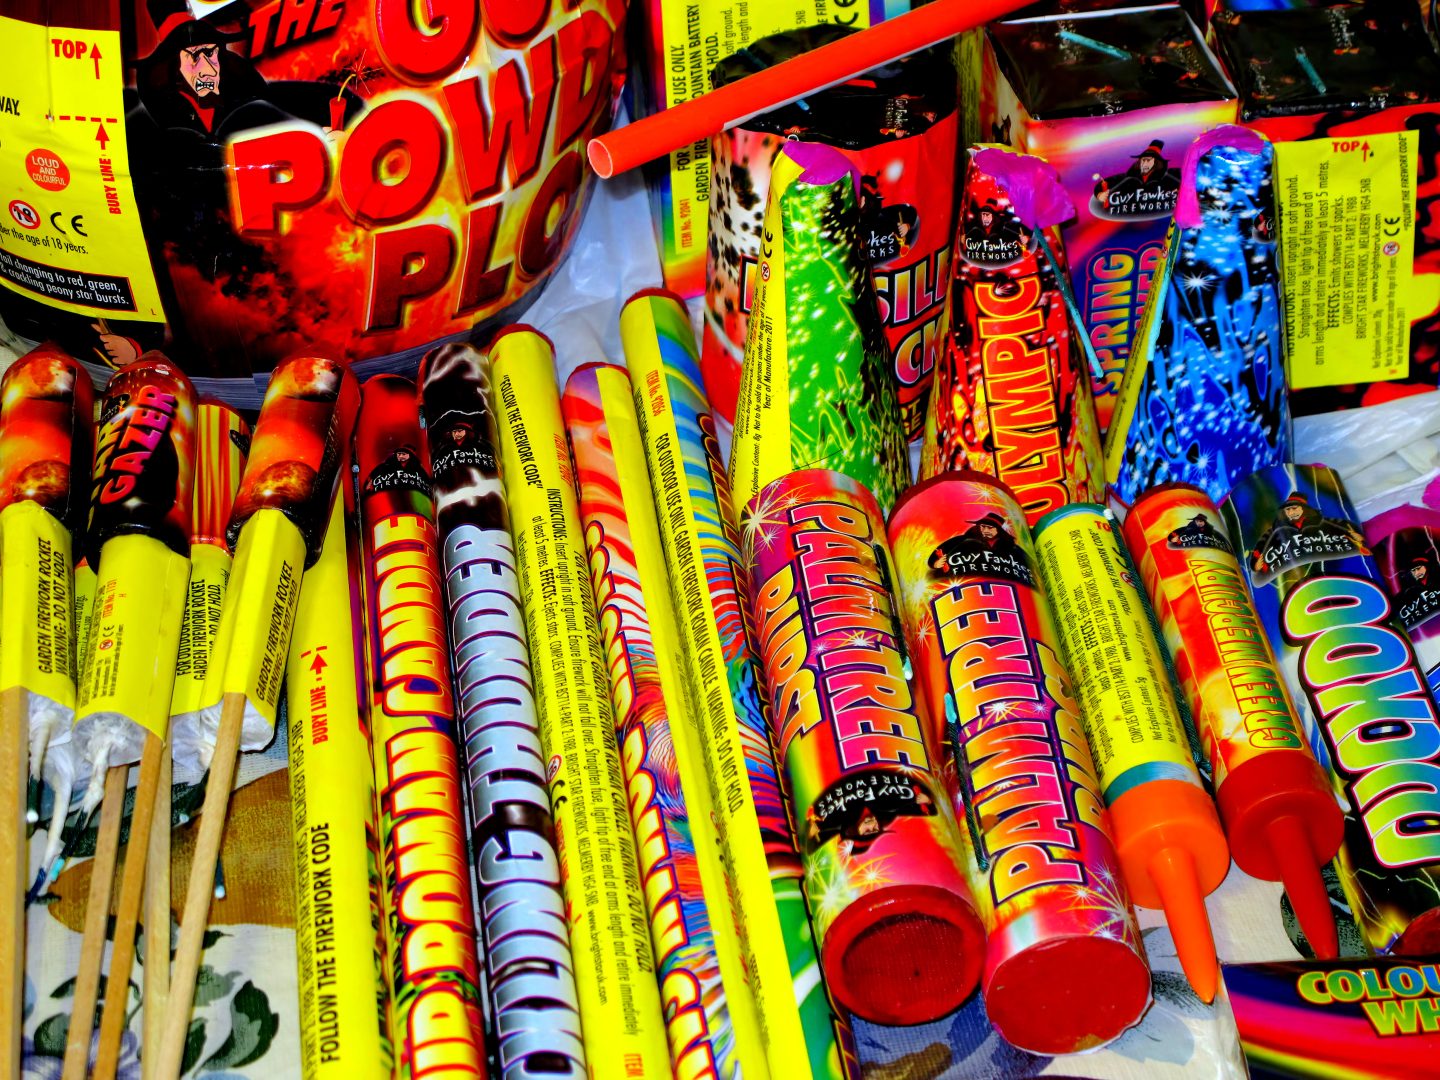 Sutton-in-Ashfield, Nottinghamshire, UK.  A selection of various home fireworks taken on a table top on the 5th November 2011.